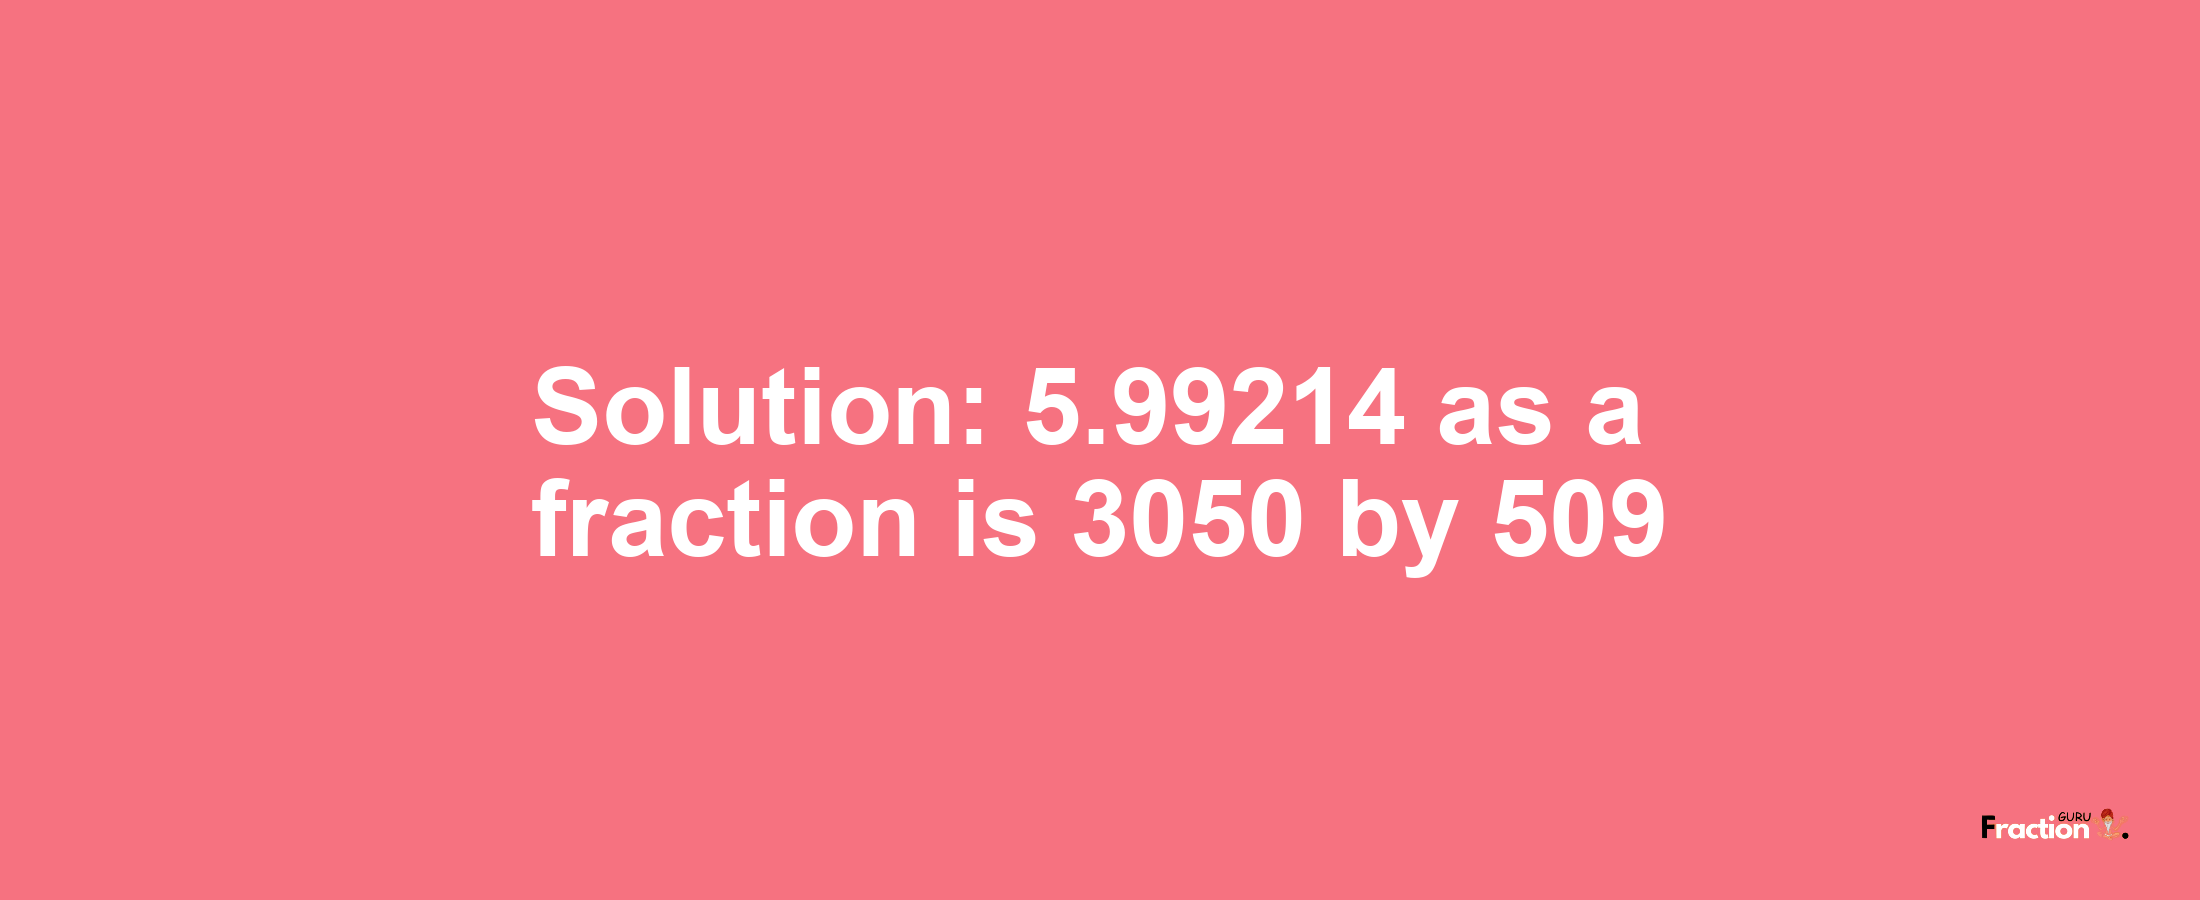 Solution:5.99214 as a fraction is 3050/509